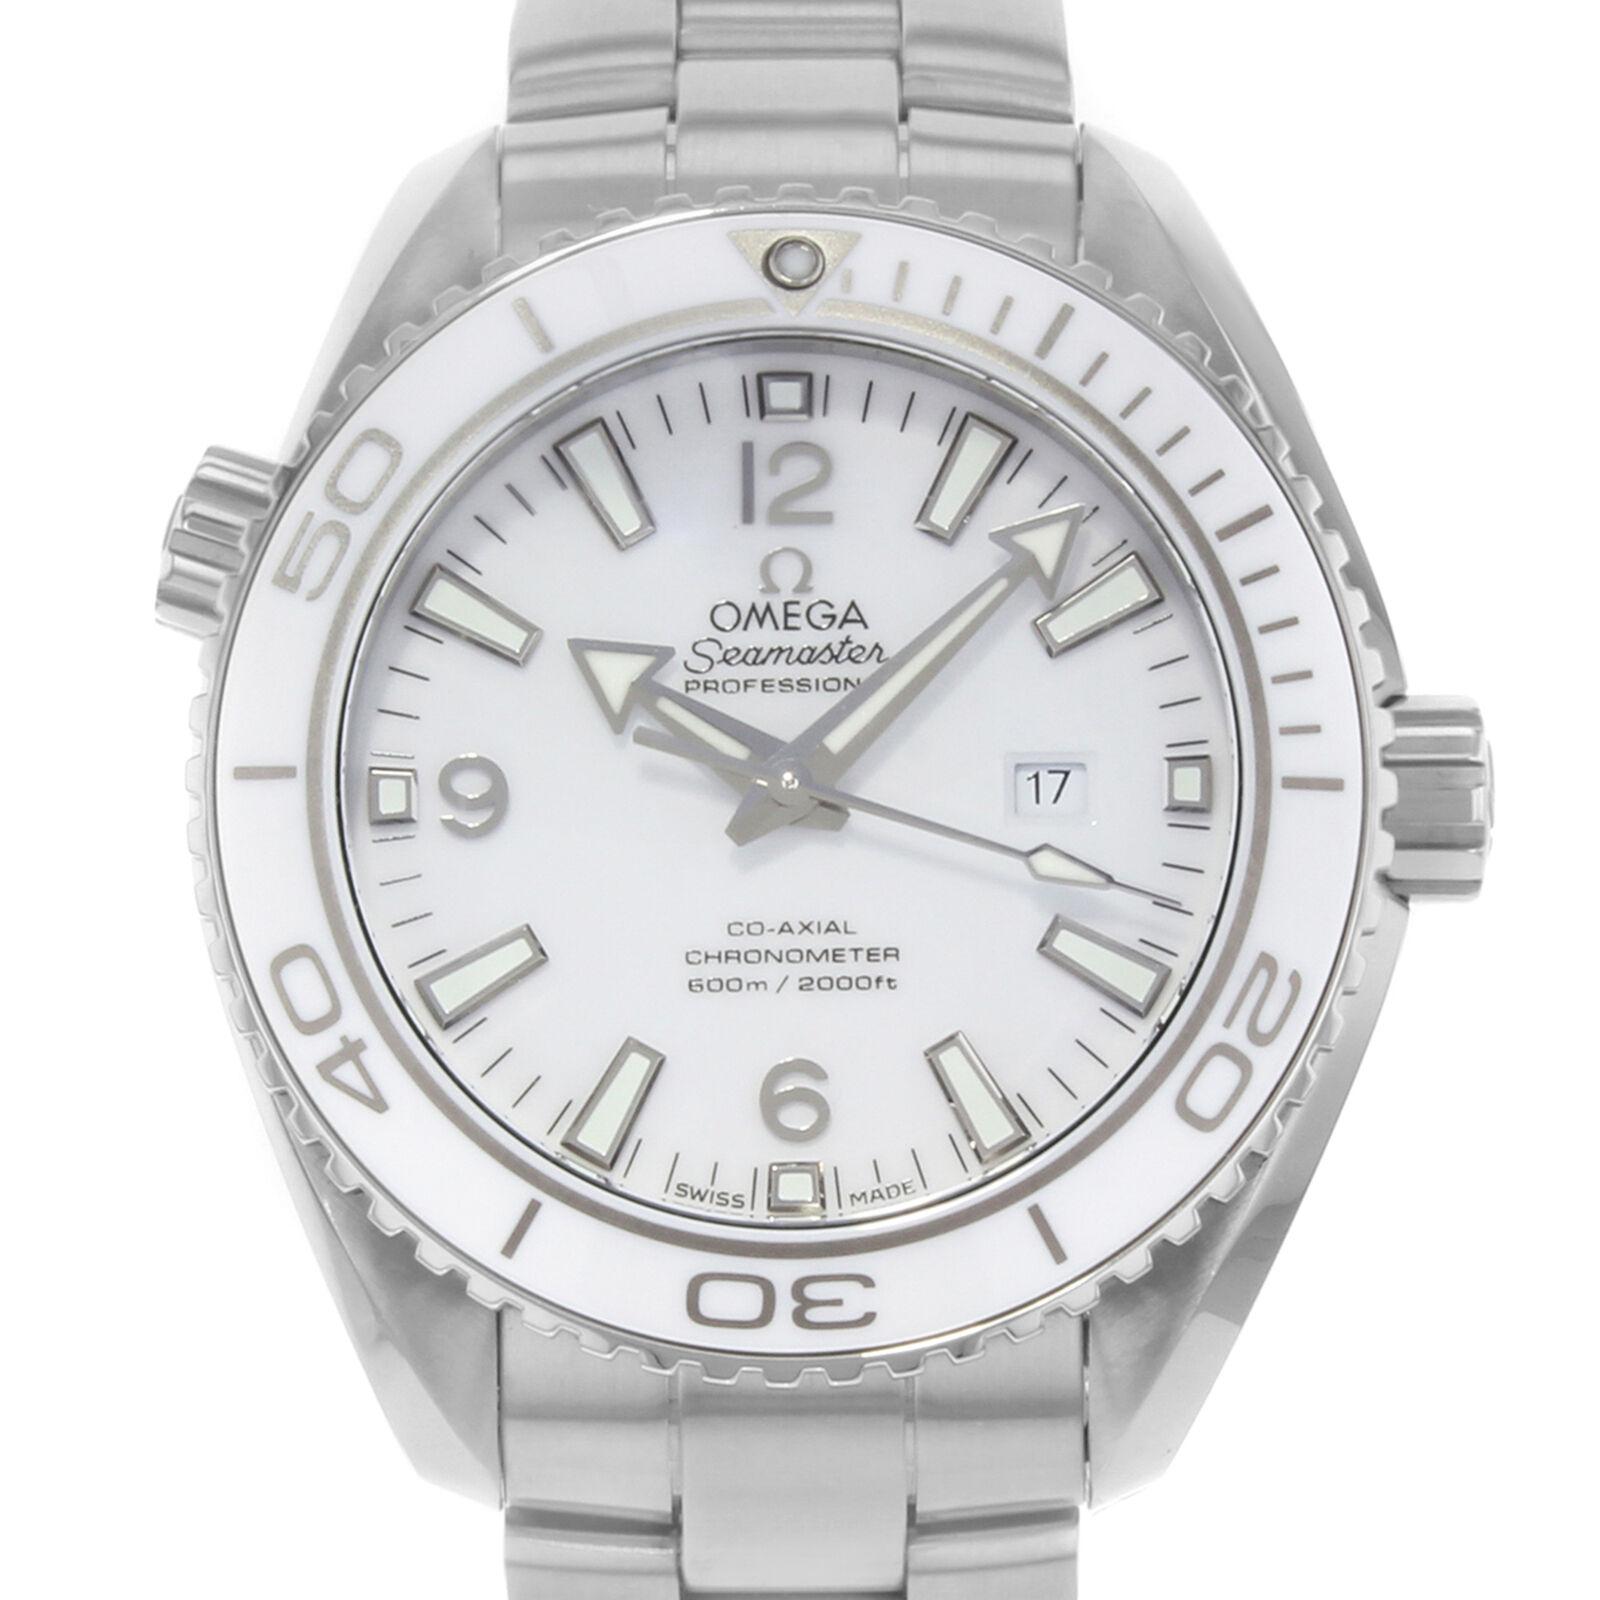 This display model Omega Seamaster 232.30.38.20.04.001 is a beautiful Unisex timepiece that is powered by an automatic movement which is cased in a stainless steel case. It has a round shape face, date dial and has hand sticks & numerals style